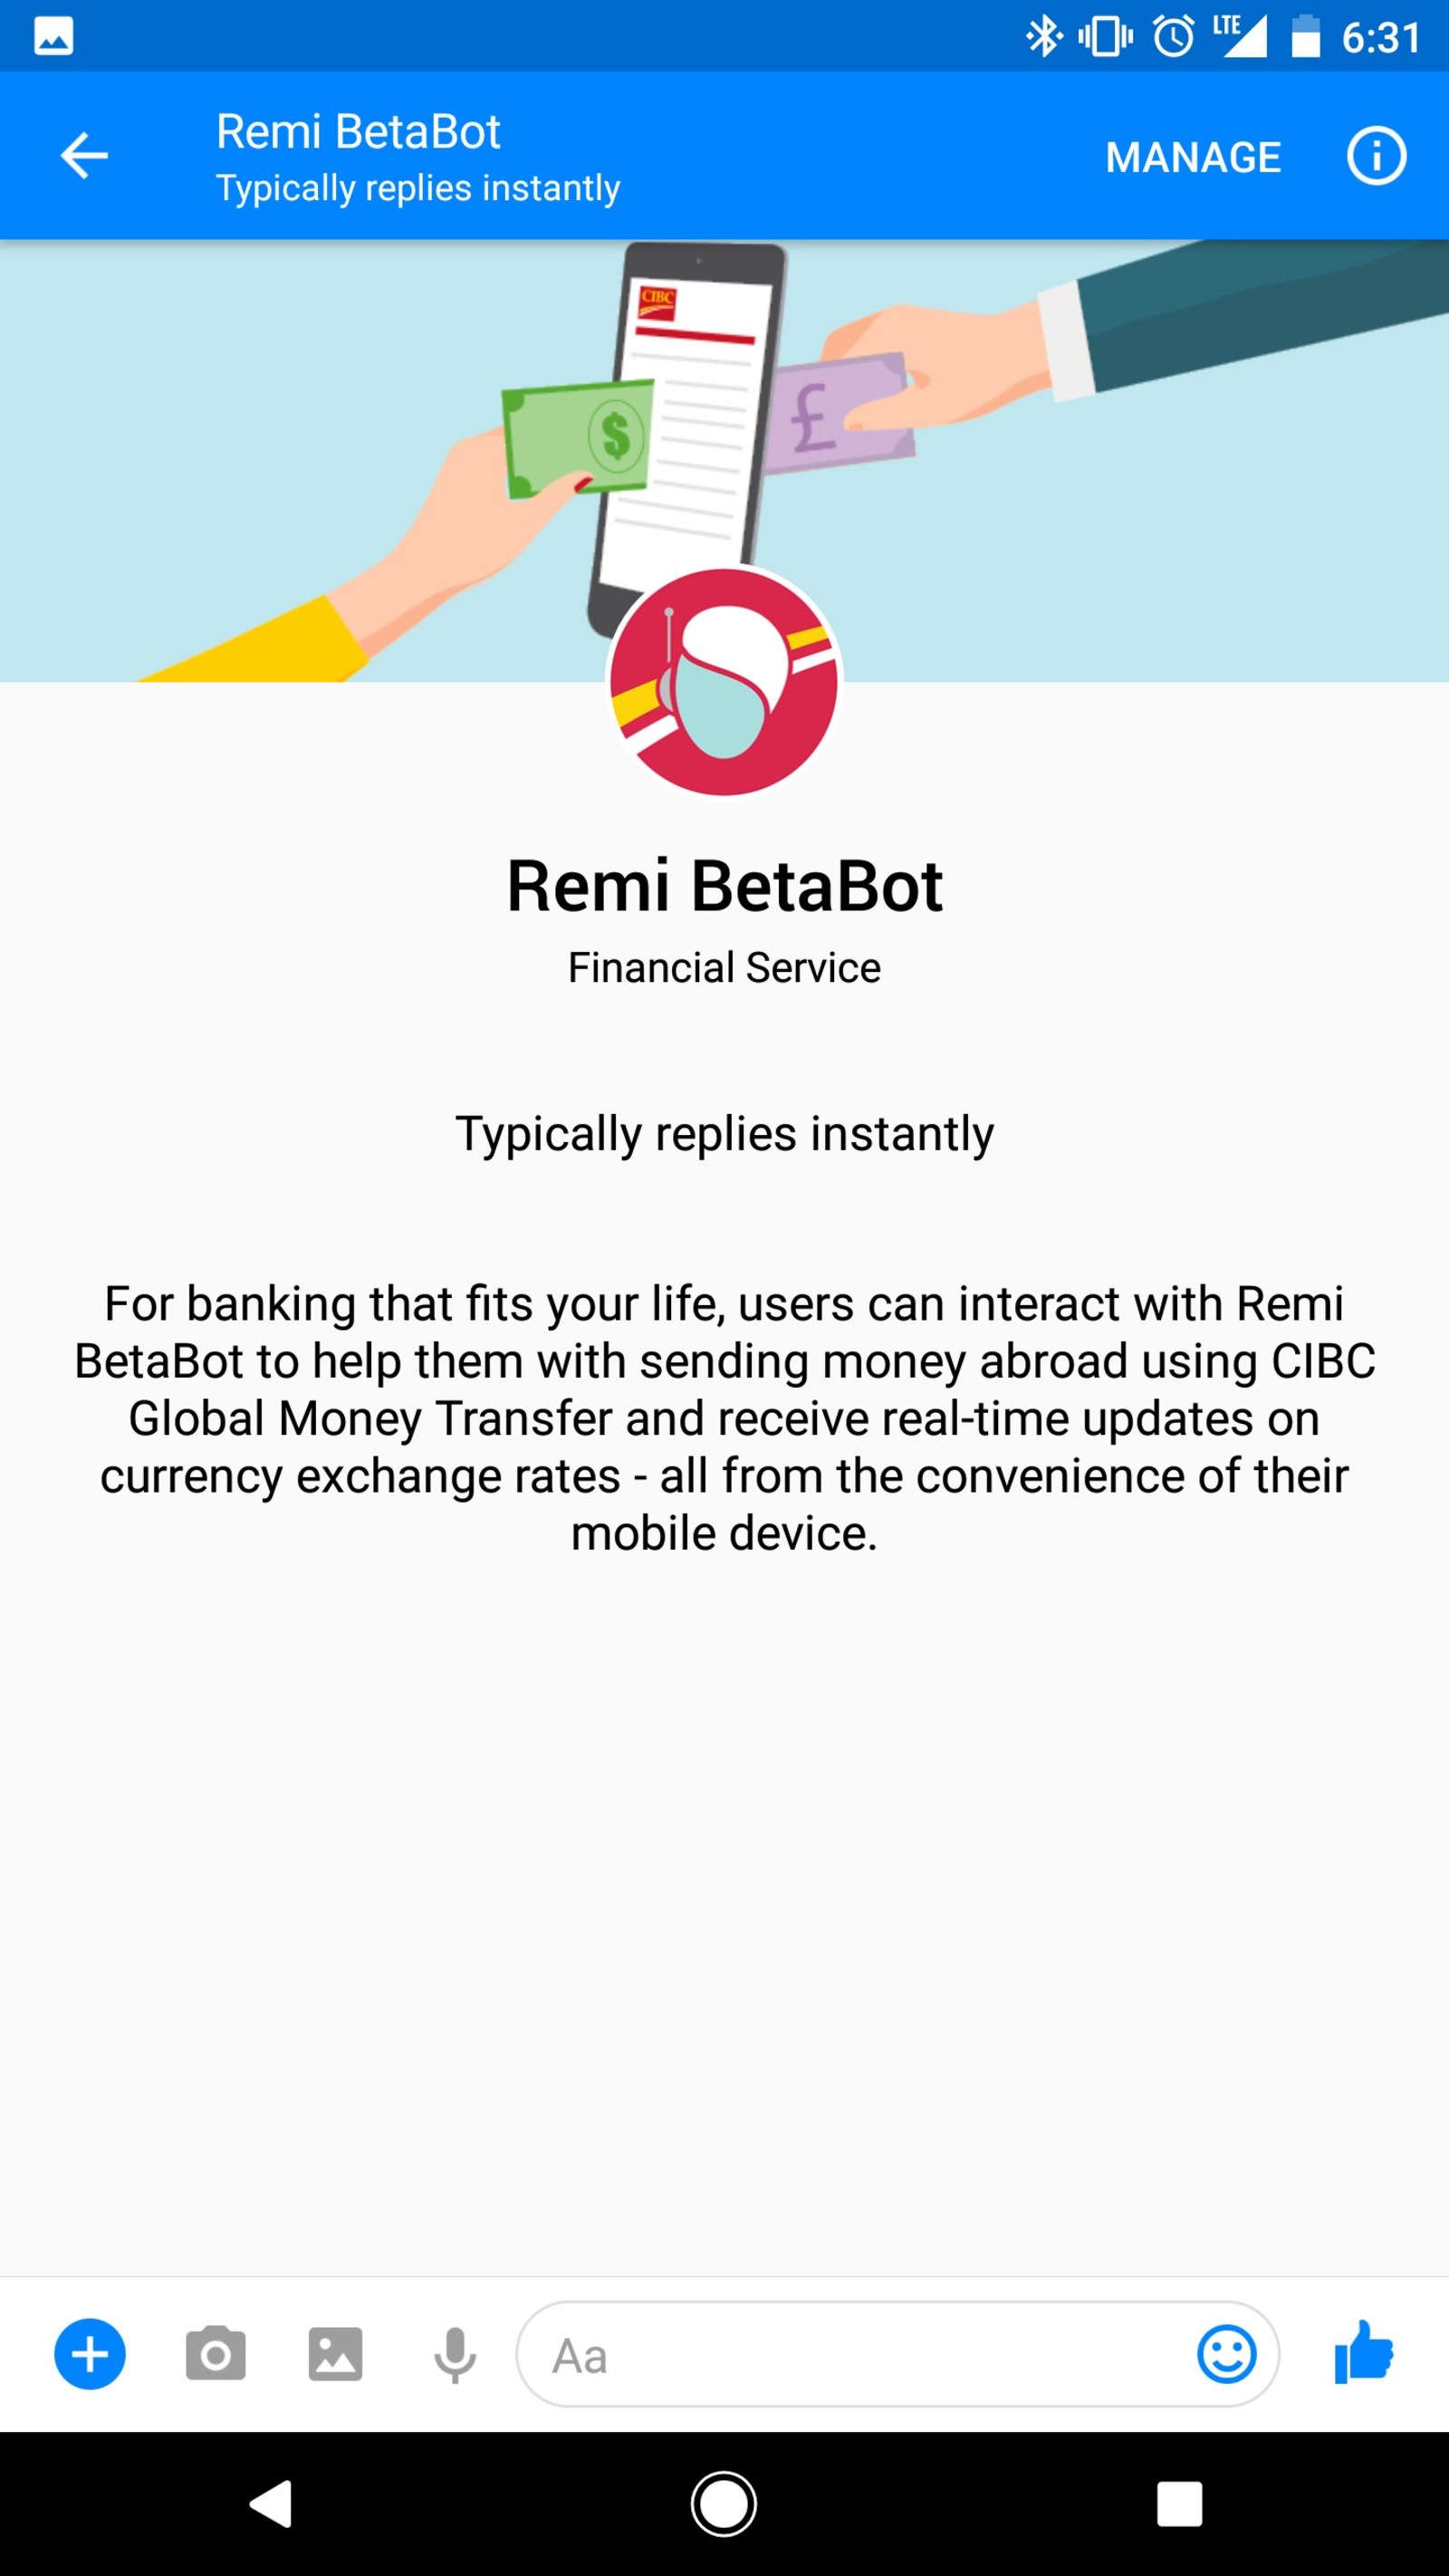 Cibc Launches Remi A Digital Assistant That Helps Clients Track Fx Rates And Easily Send Money Overseas Through Messenger Money Bloggess